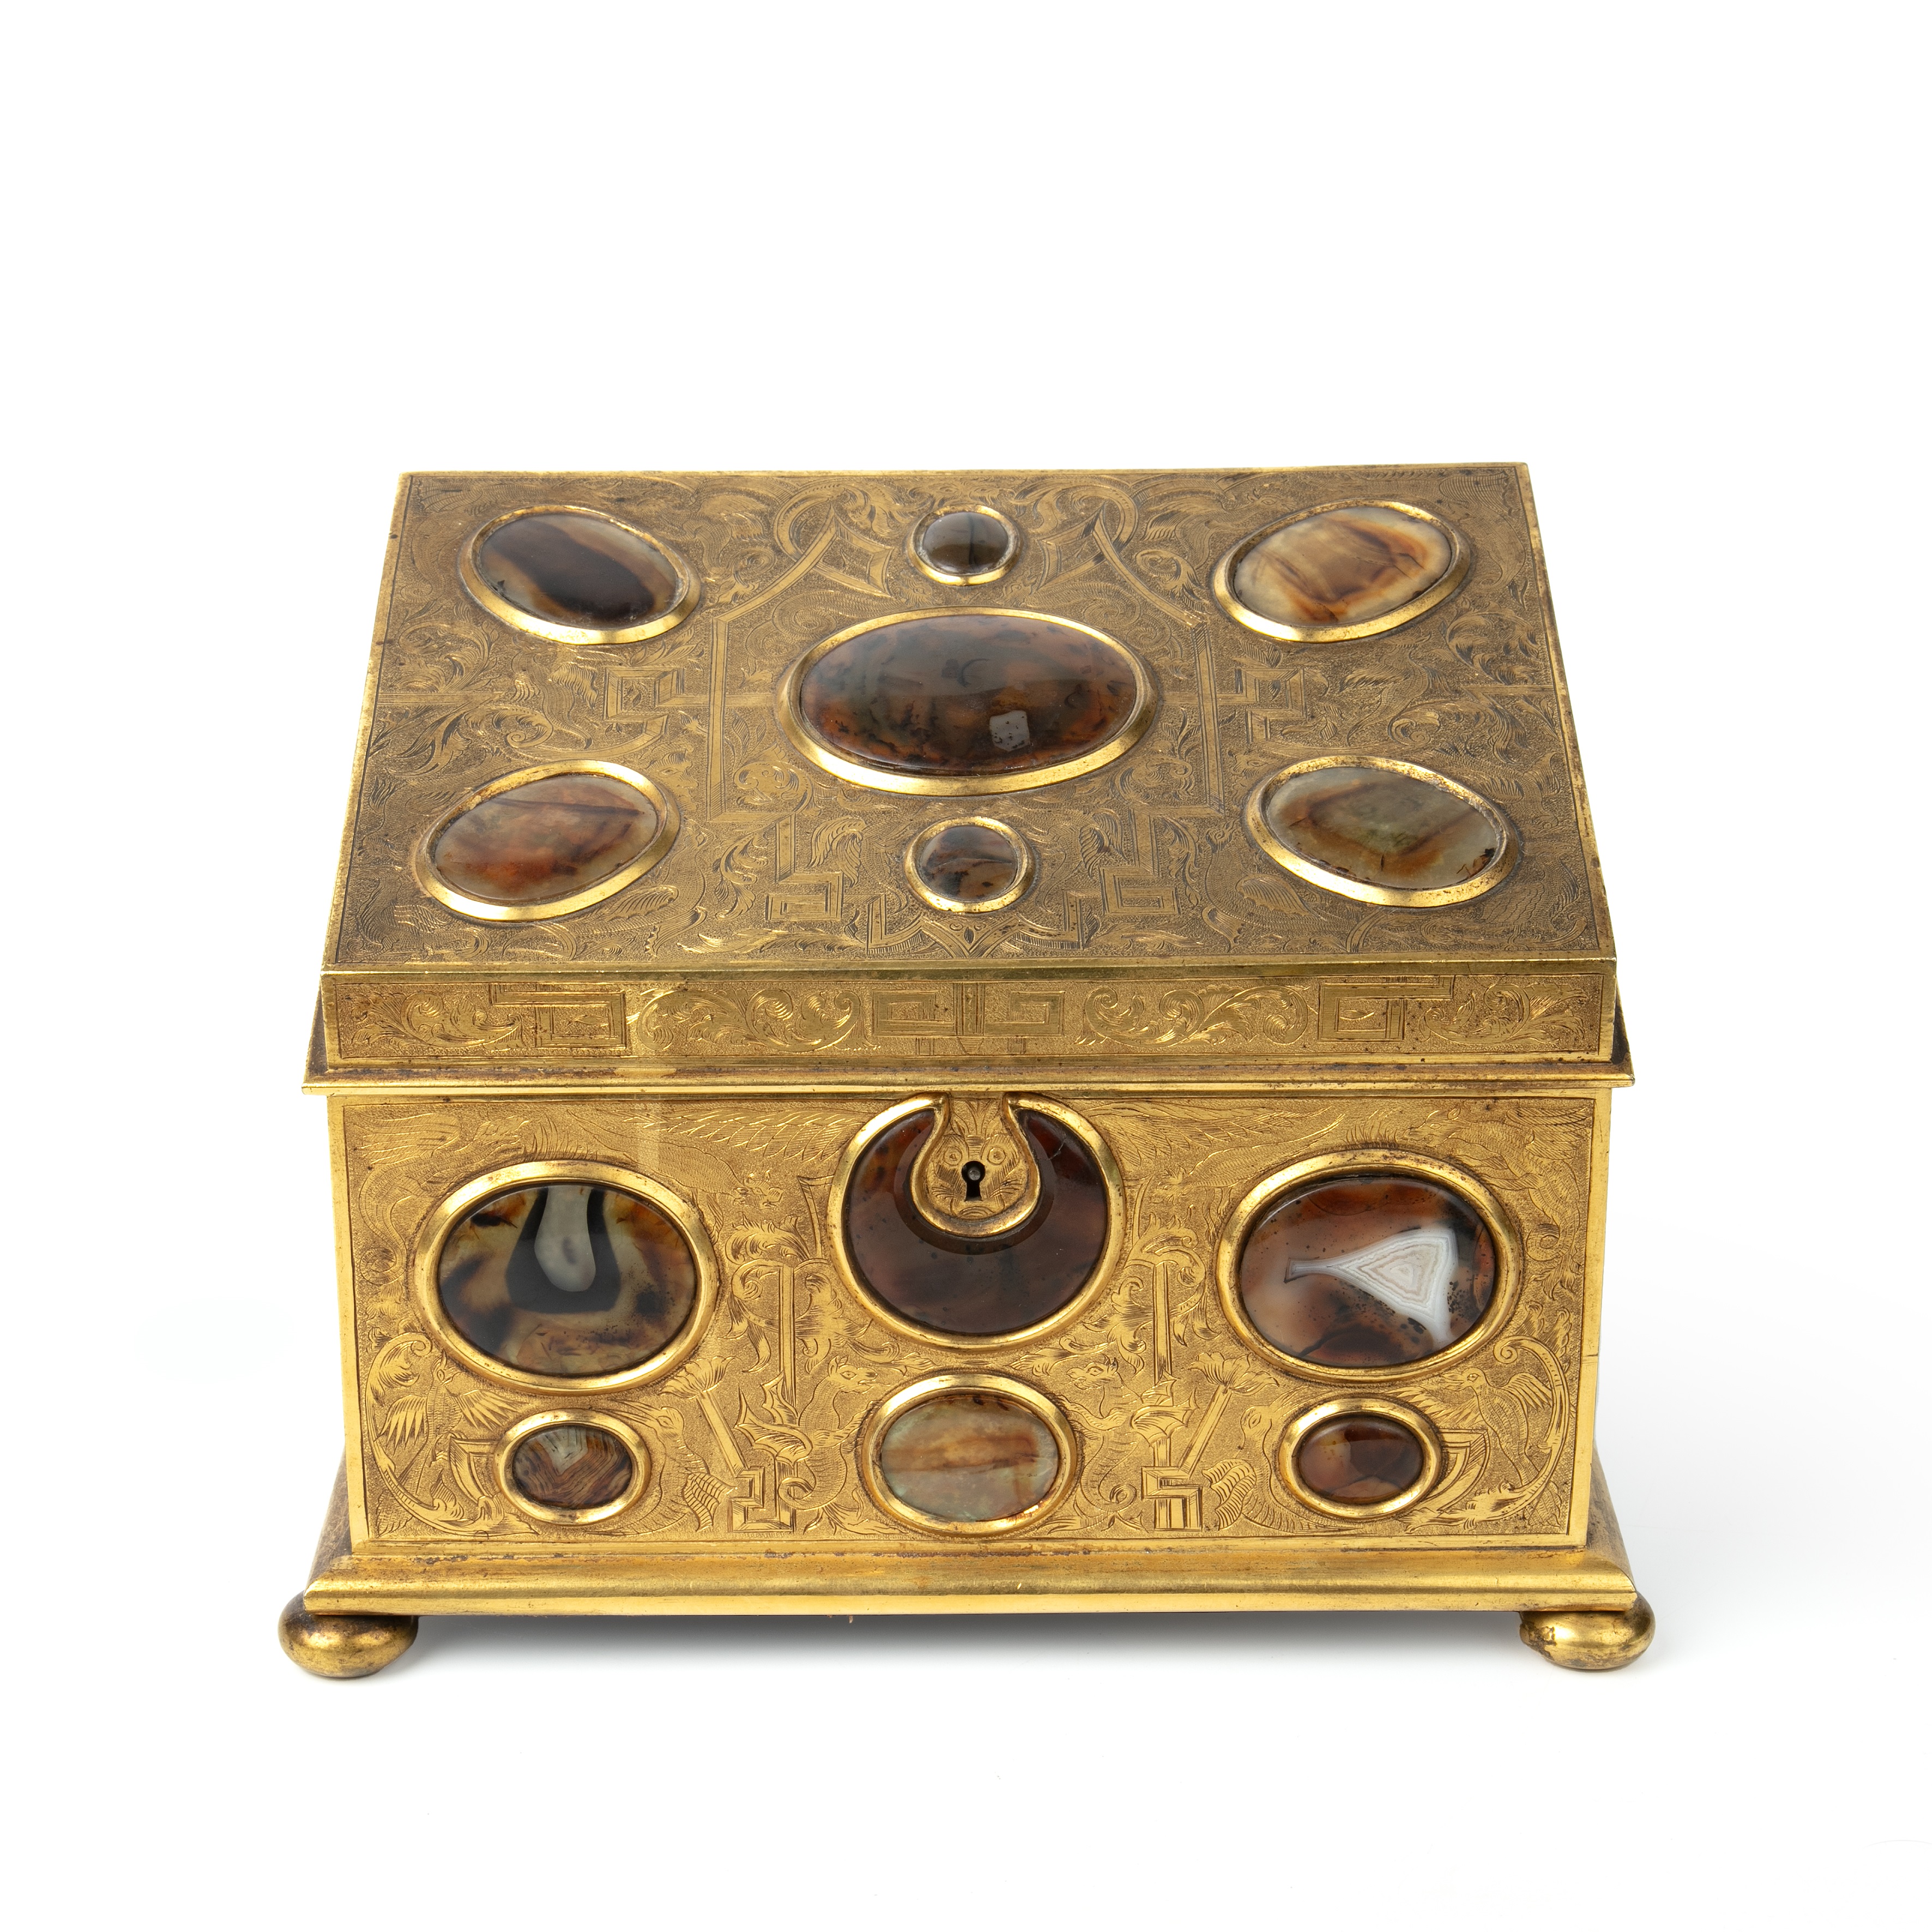 A 19th century correspondence gilt box with engraved decoration and inset cabochon stones hardstones - Image 2 of 25